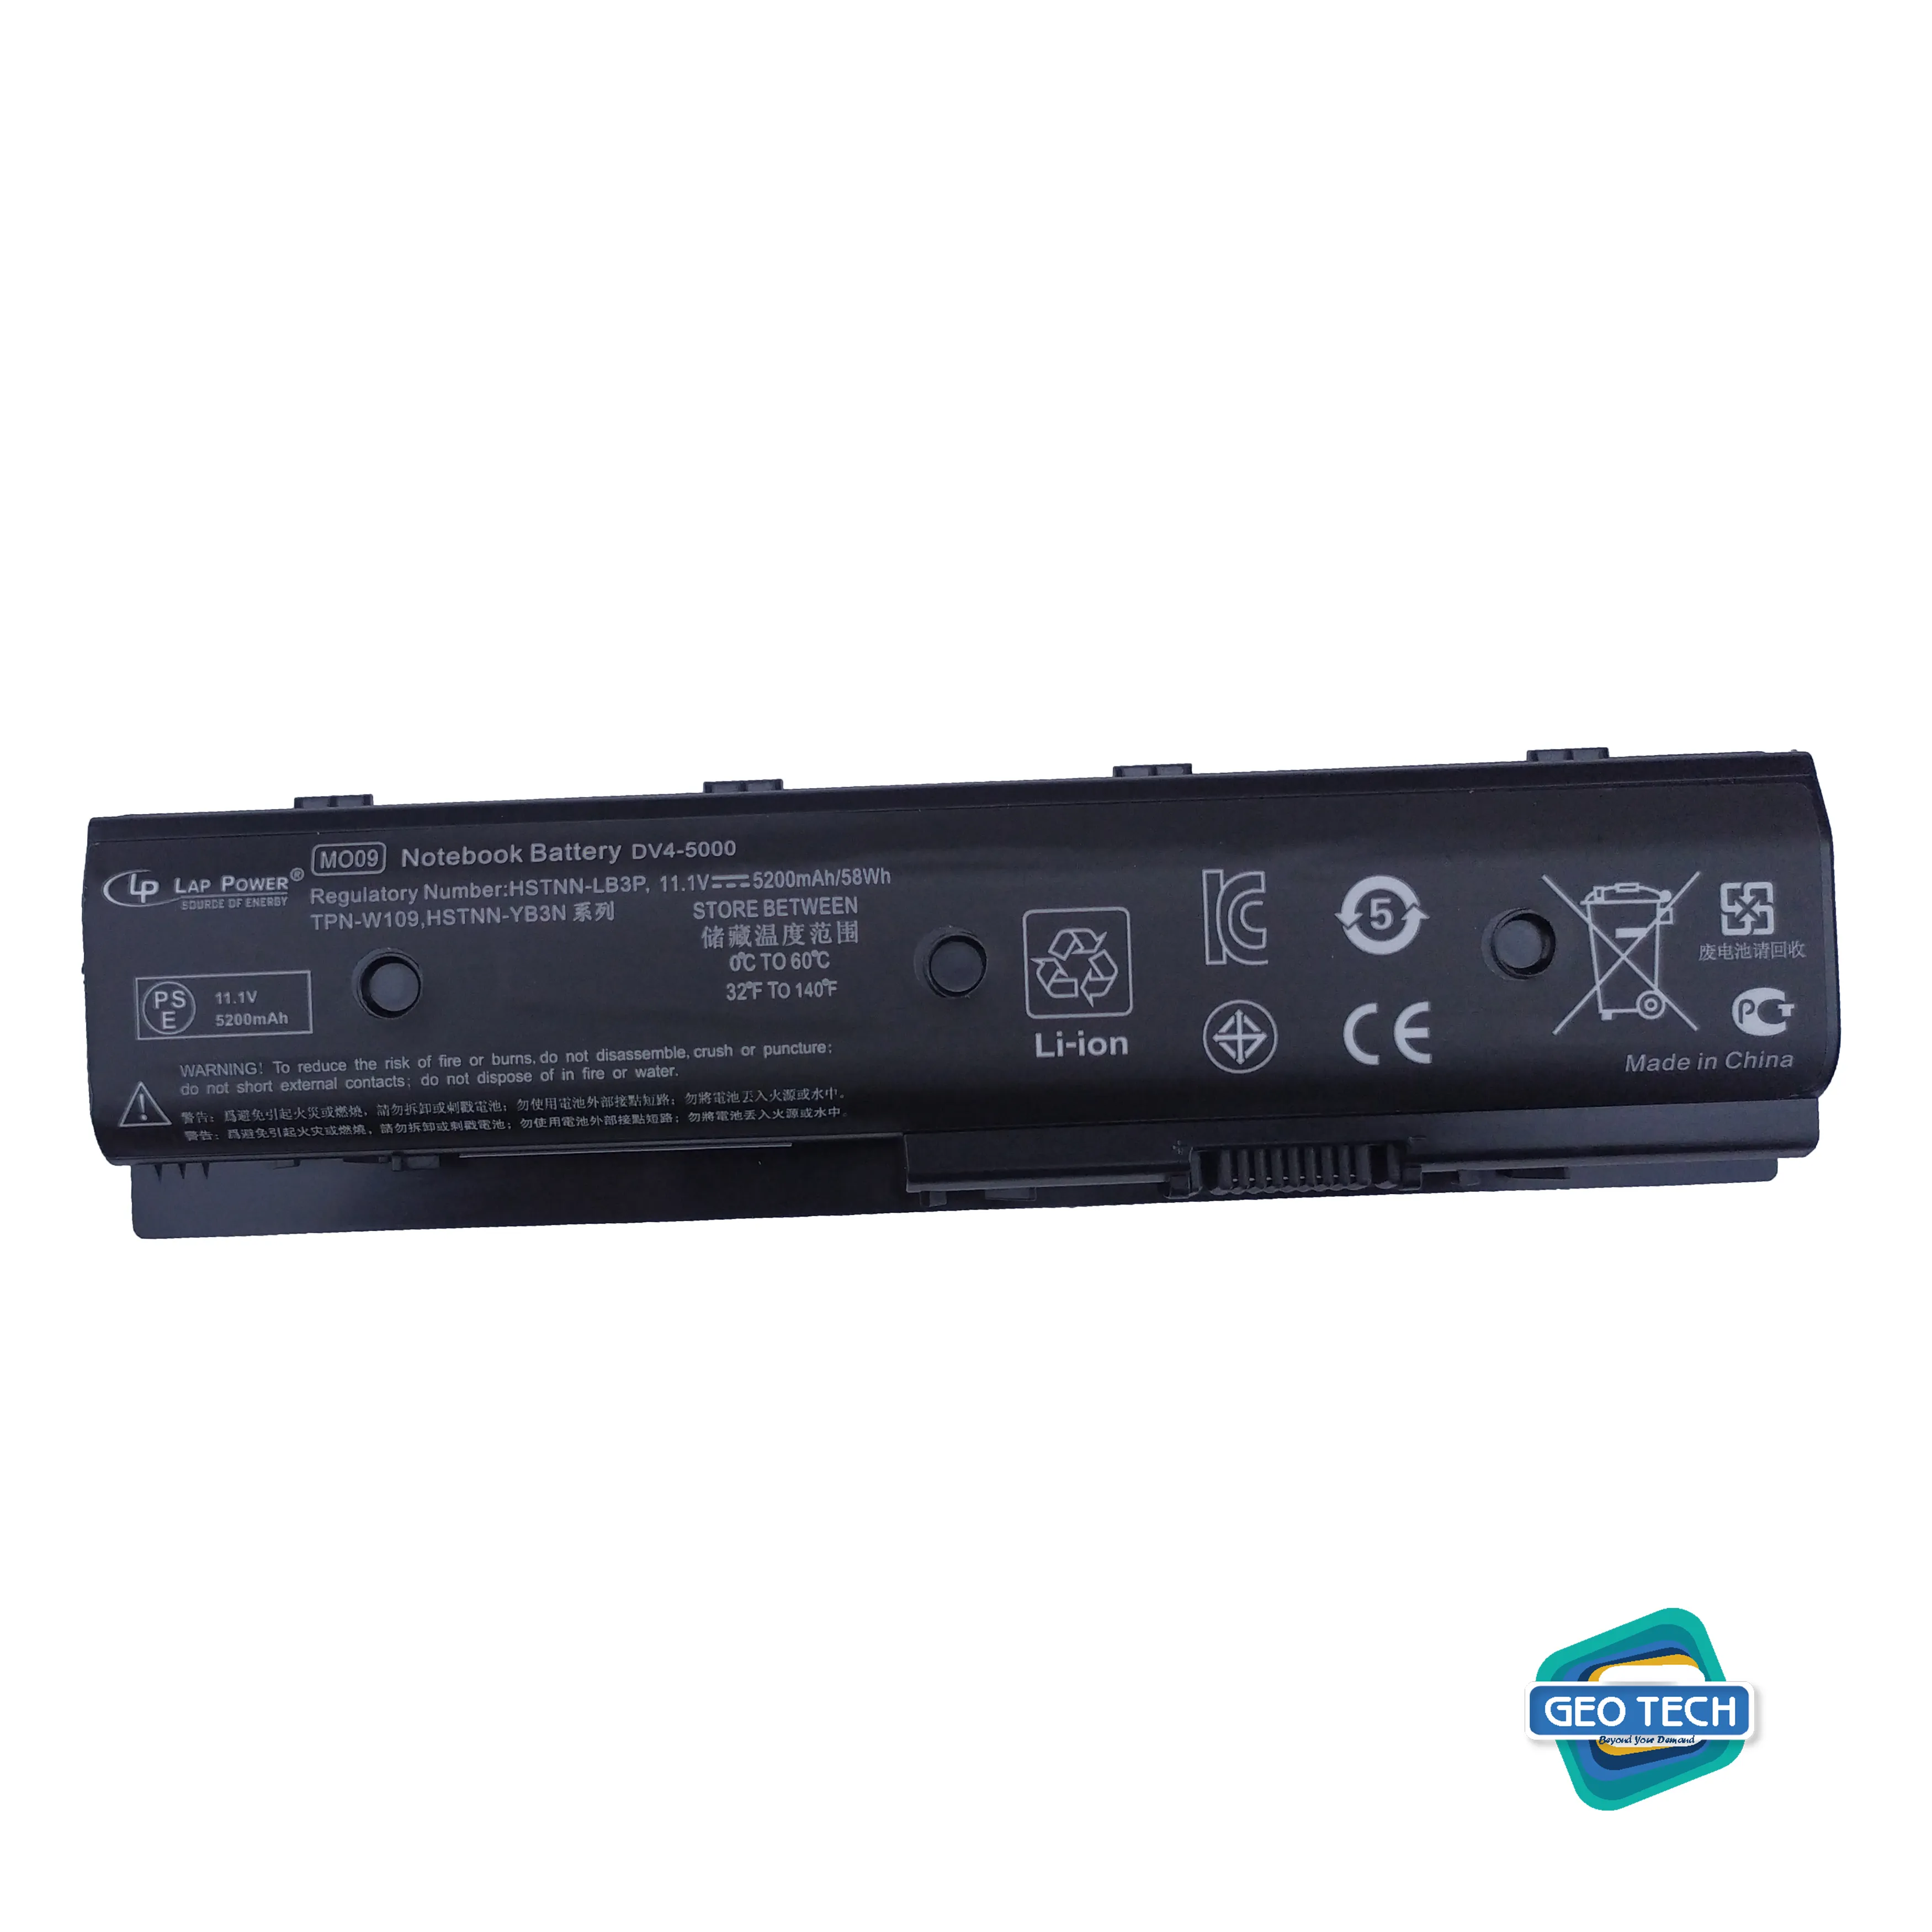 Replacement 6 Cell HP DV4-5000 Battery | High Quality 6 Cell HP DV4-5000 Battery